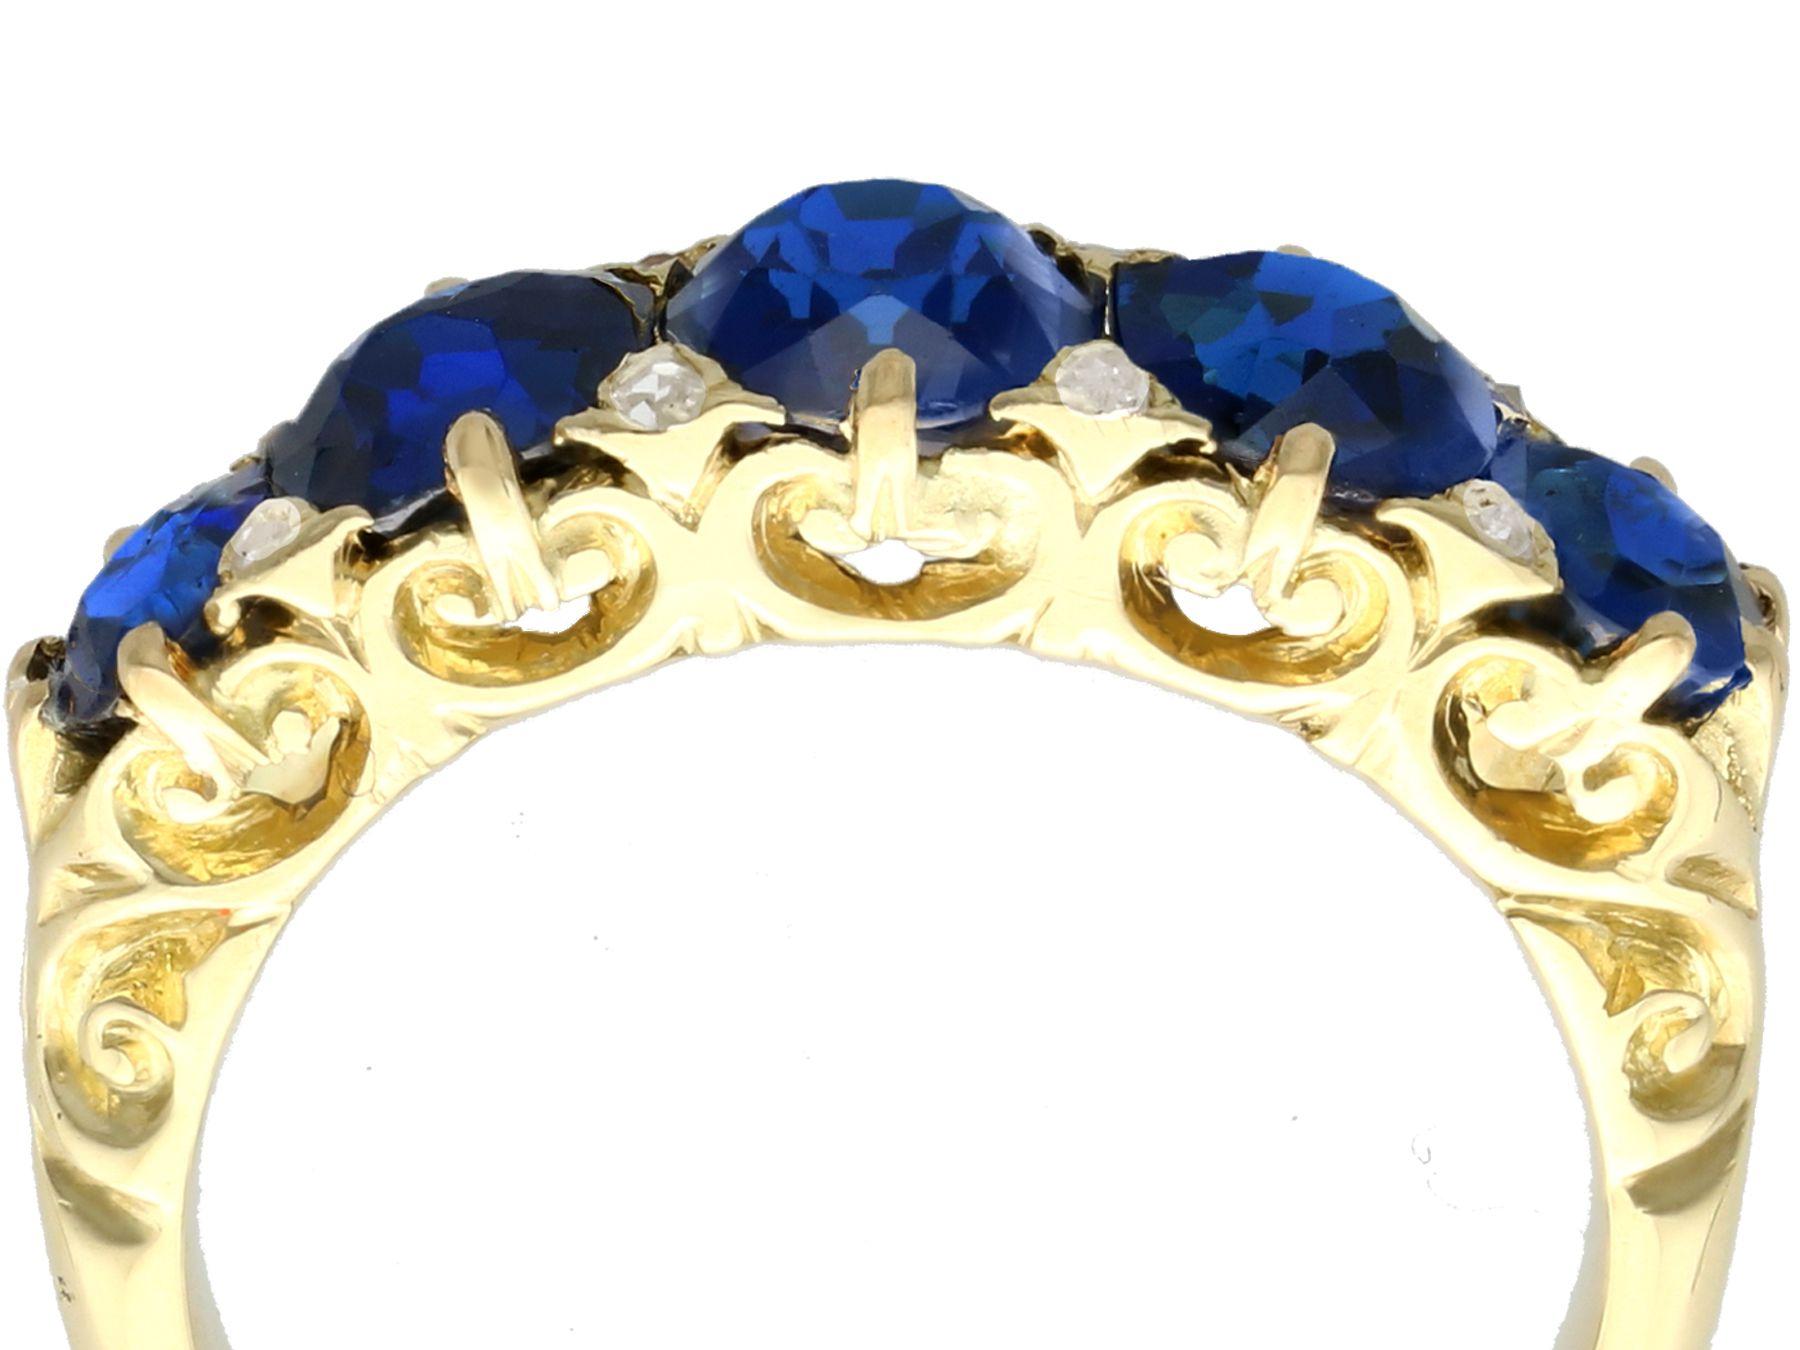 Oval Cut Antique 3.15 Carat Basaltic Sapphire and Diamond Five Stone Ring in Yellow Gold For Sale